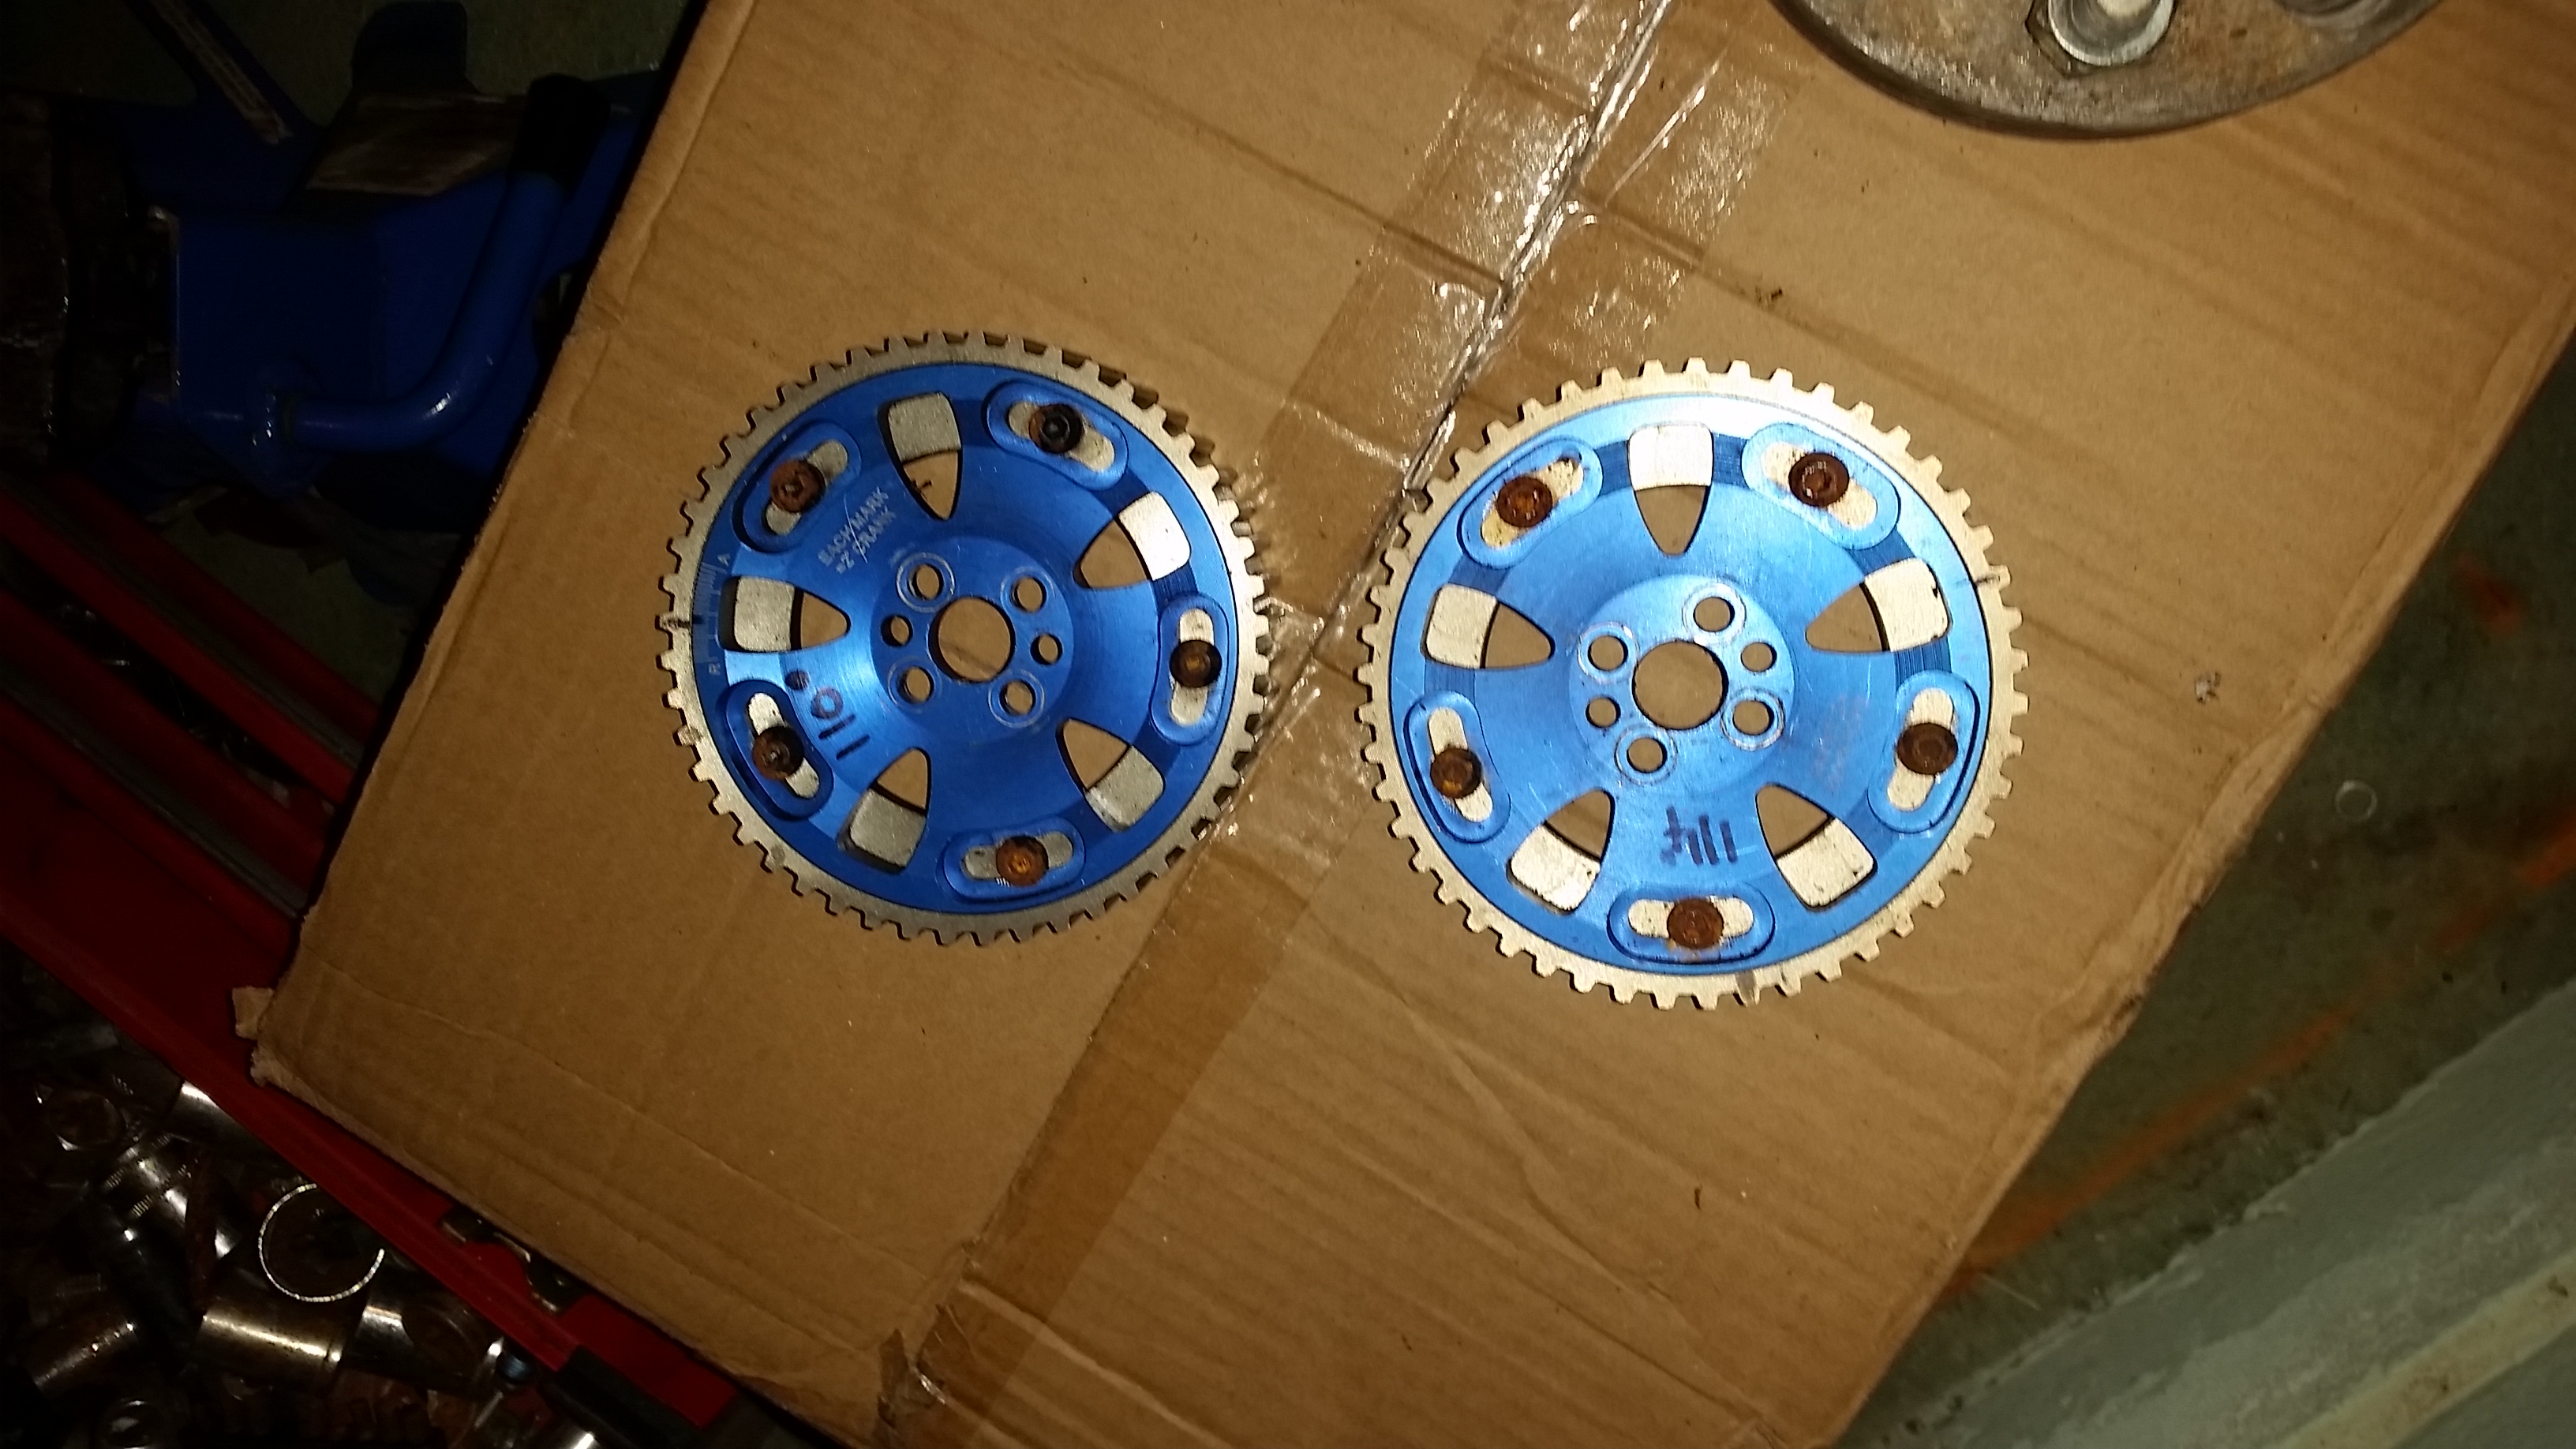 S13/rb Parts - CAM Gears, Diffs,turbos, RB Starters, ALT, PWR, Spacers